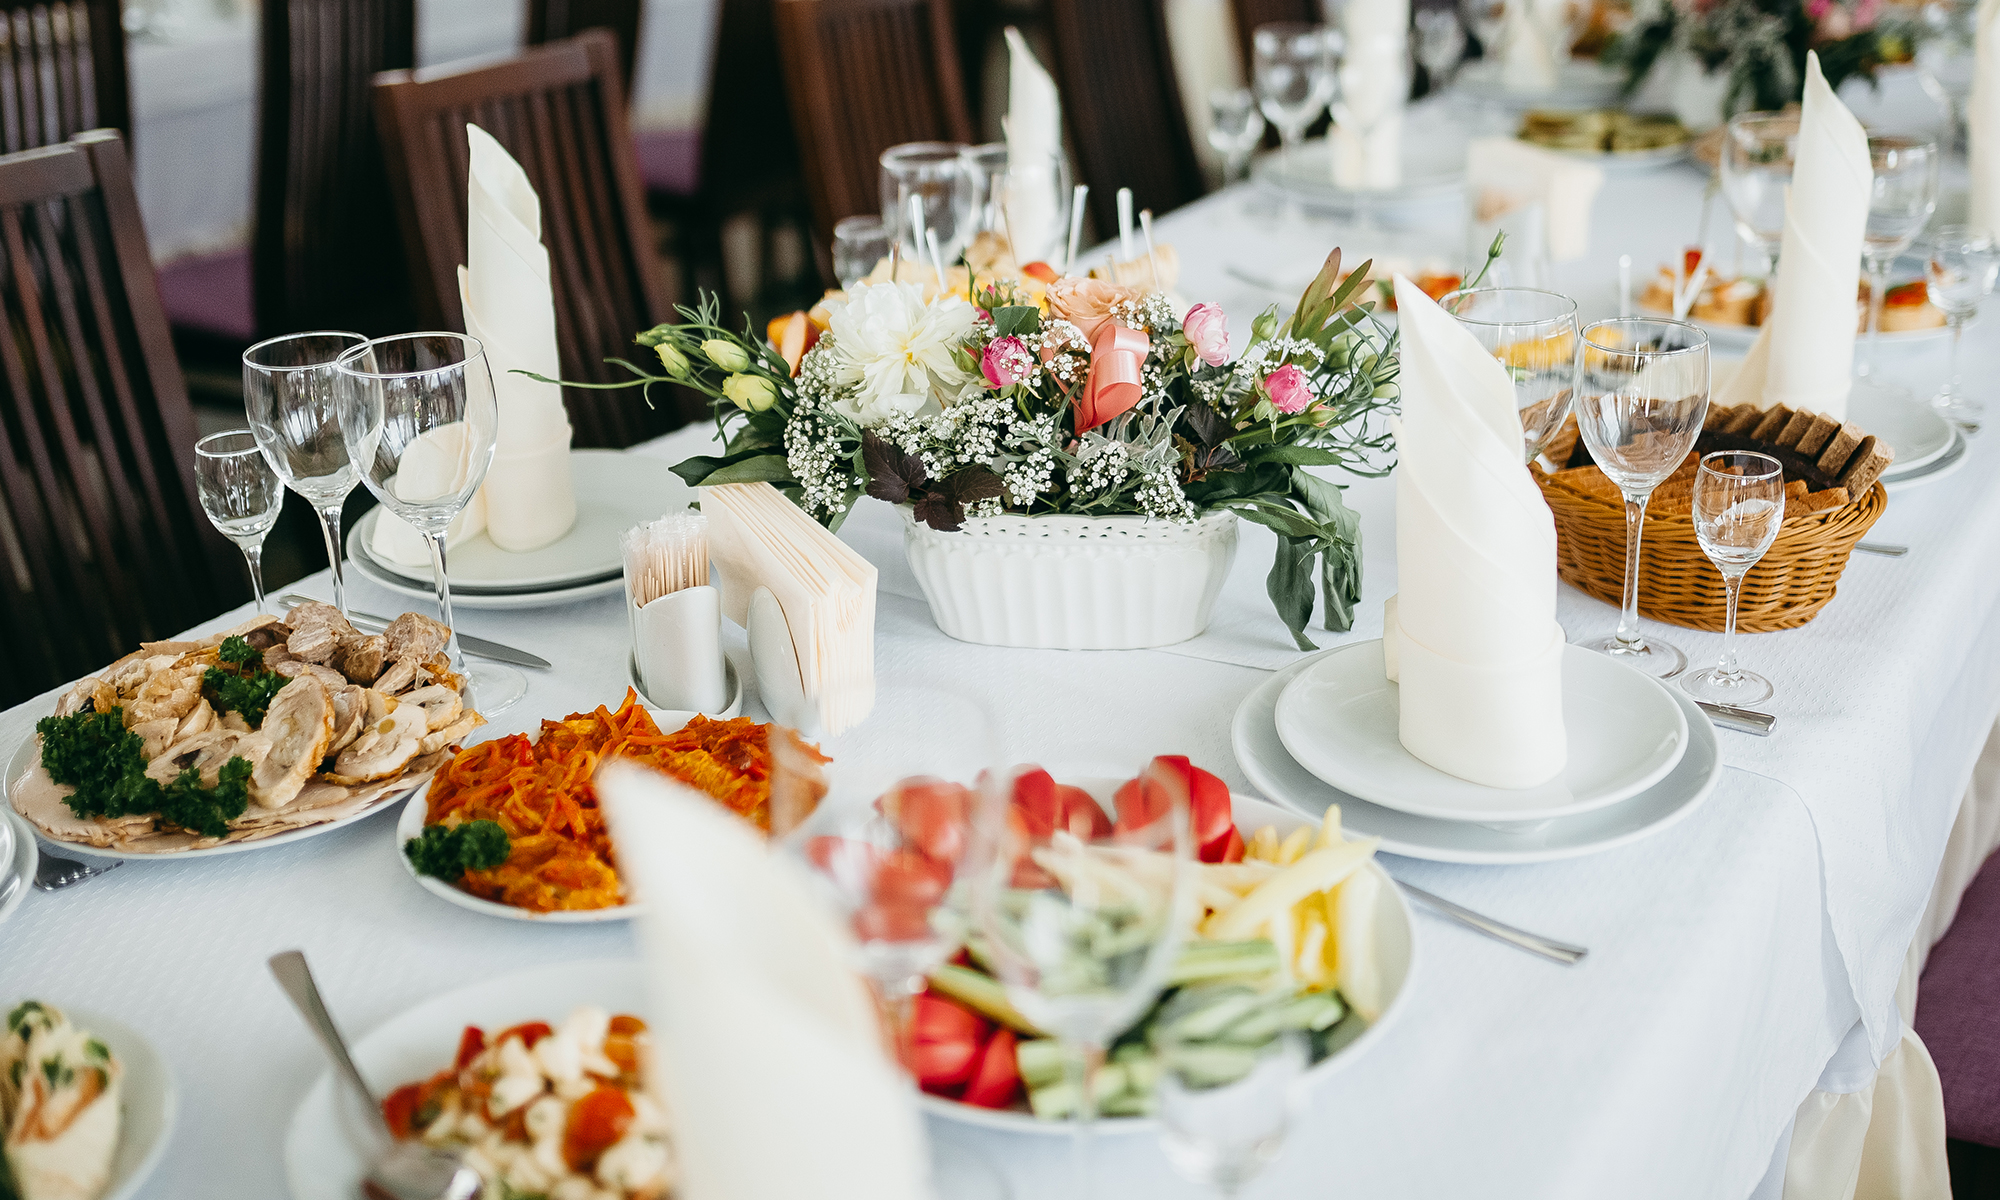 Consider a Family Style Meal for Your Intimate Wedding